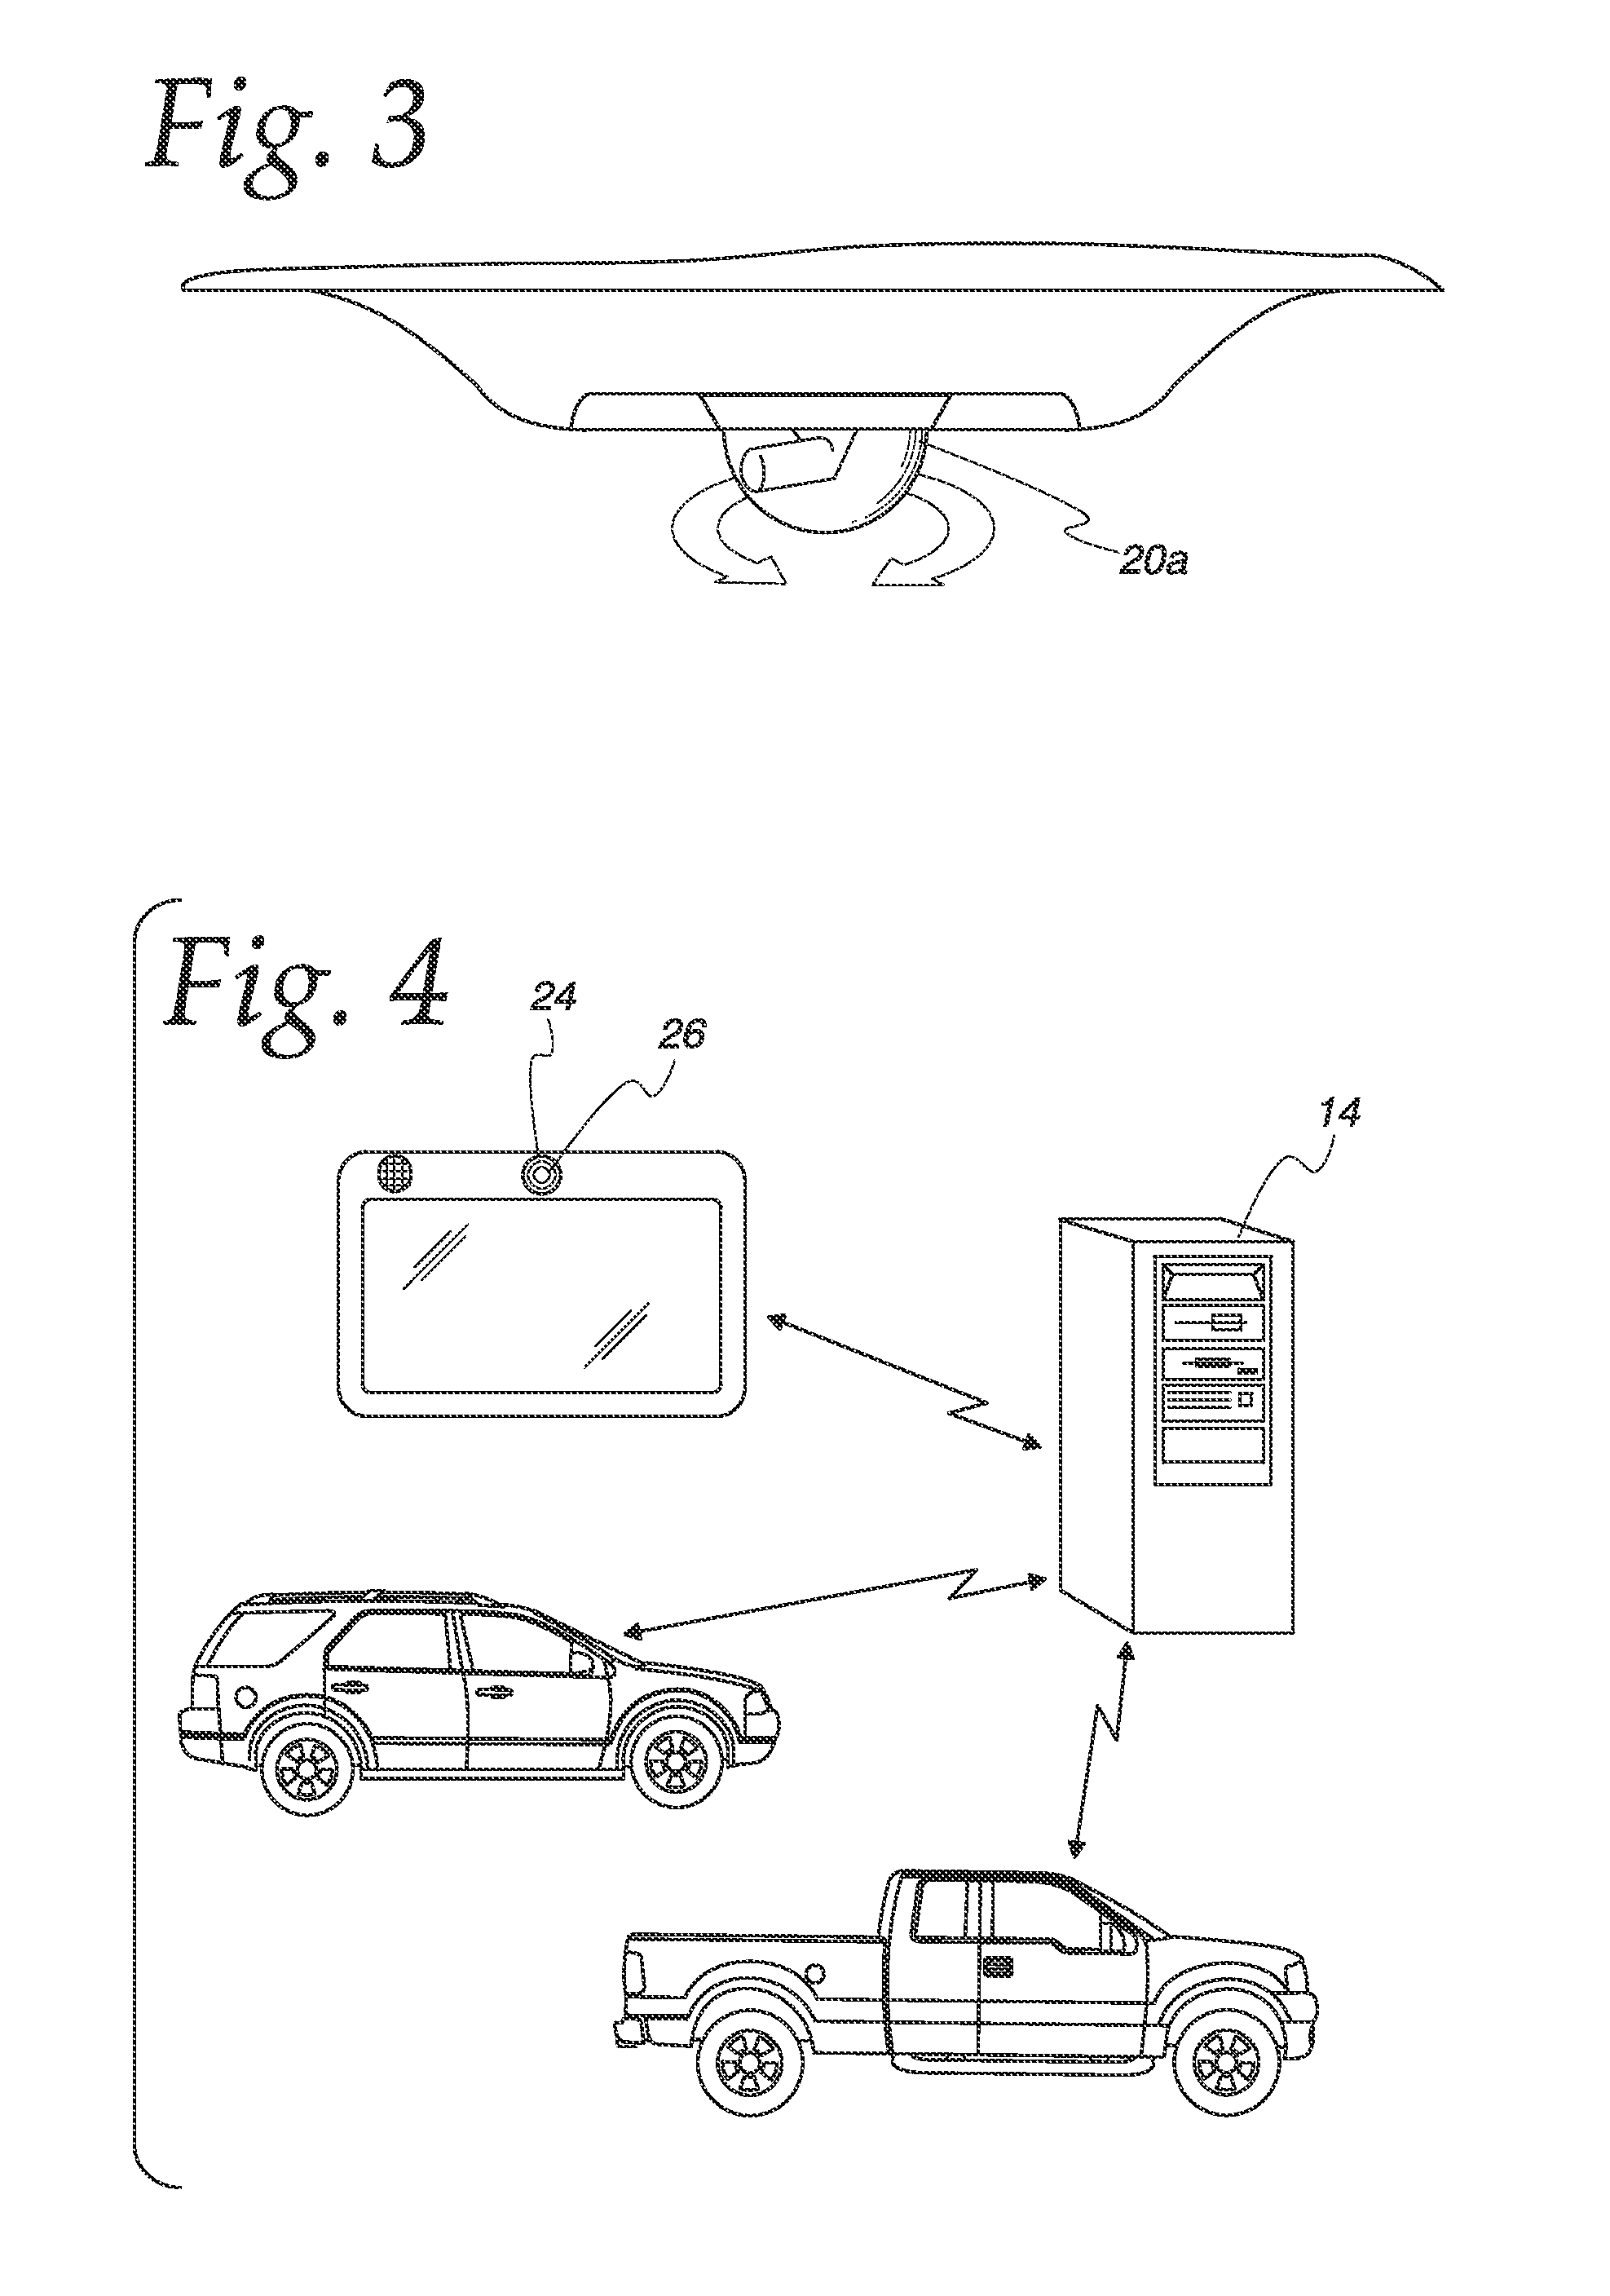 System and Method for Detecting and Remotely Assessing Vehicle Incidents and Dispatching Assistance